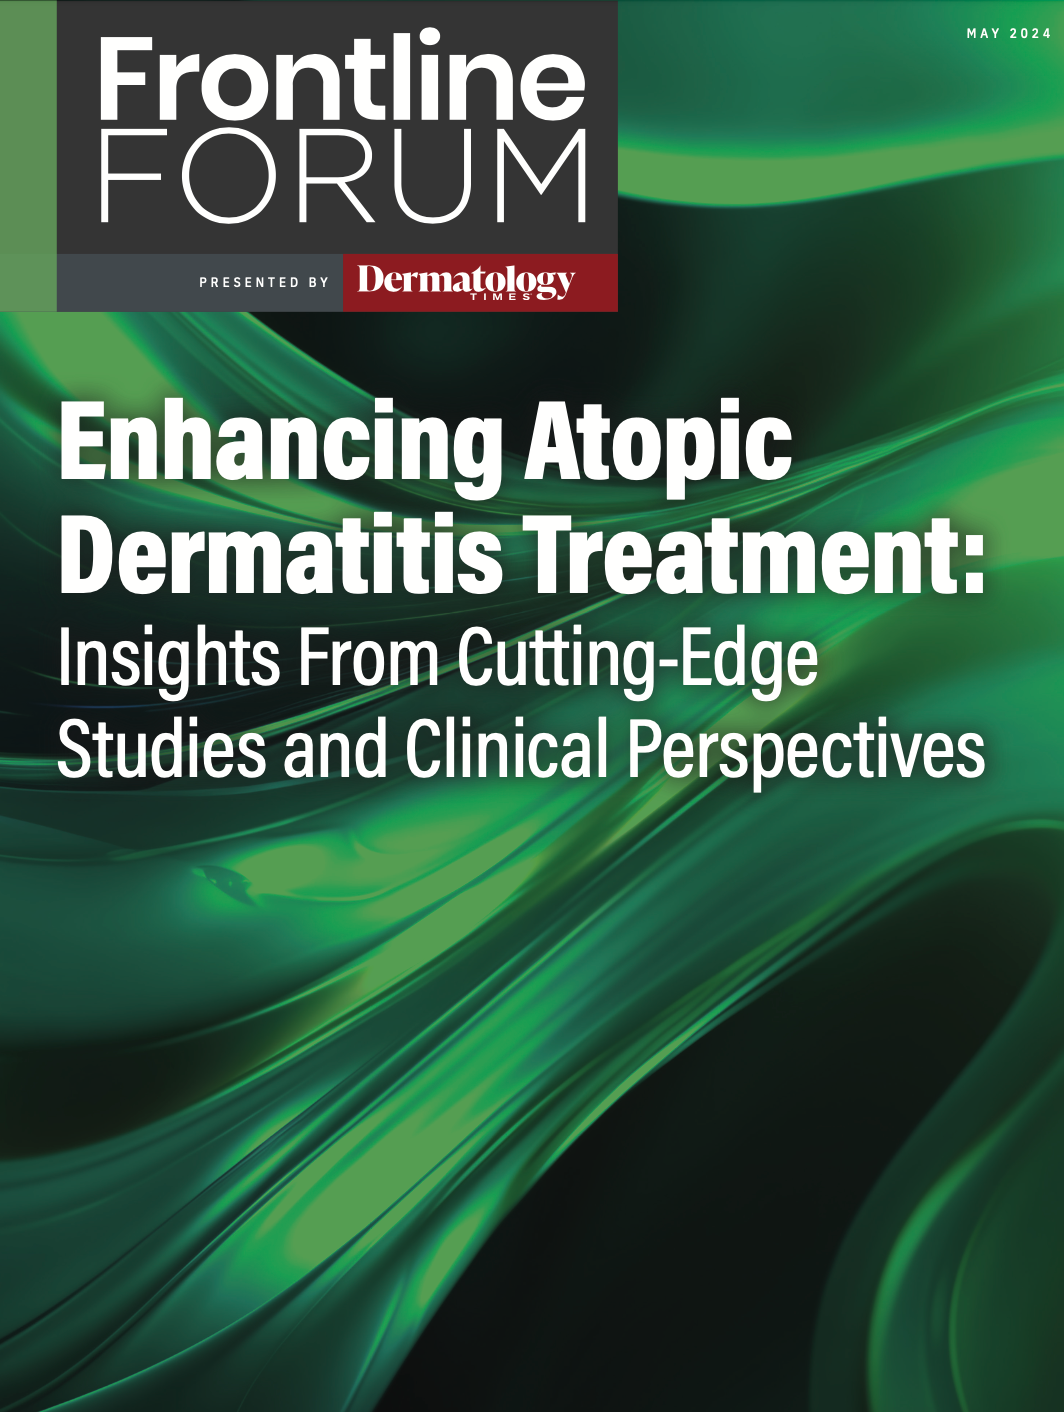 Enhancing Atopic Dermatitis Treatment: Insights From Cutting-Edge Studies and Clinical Perspectives Part 3